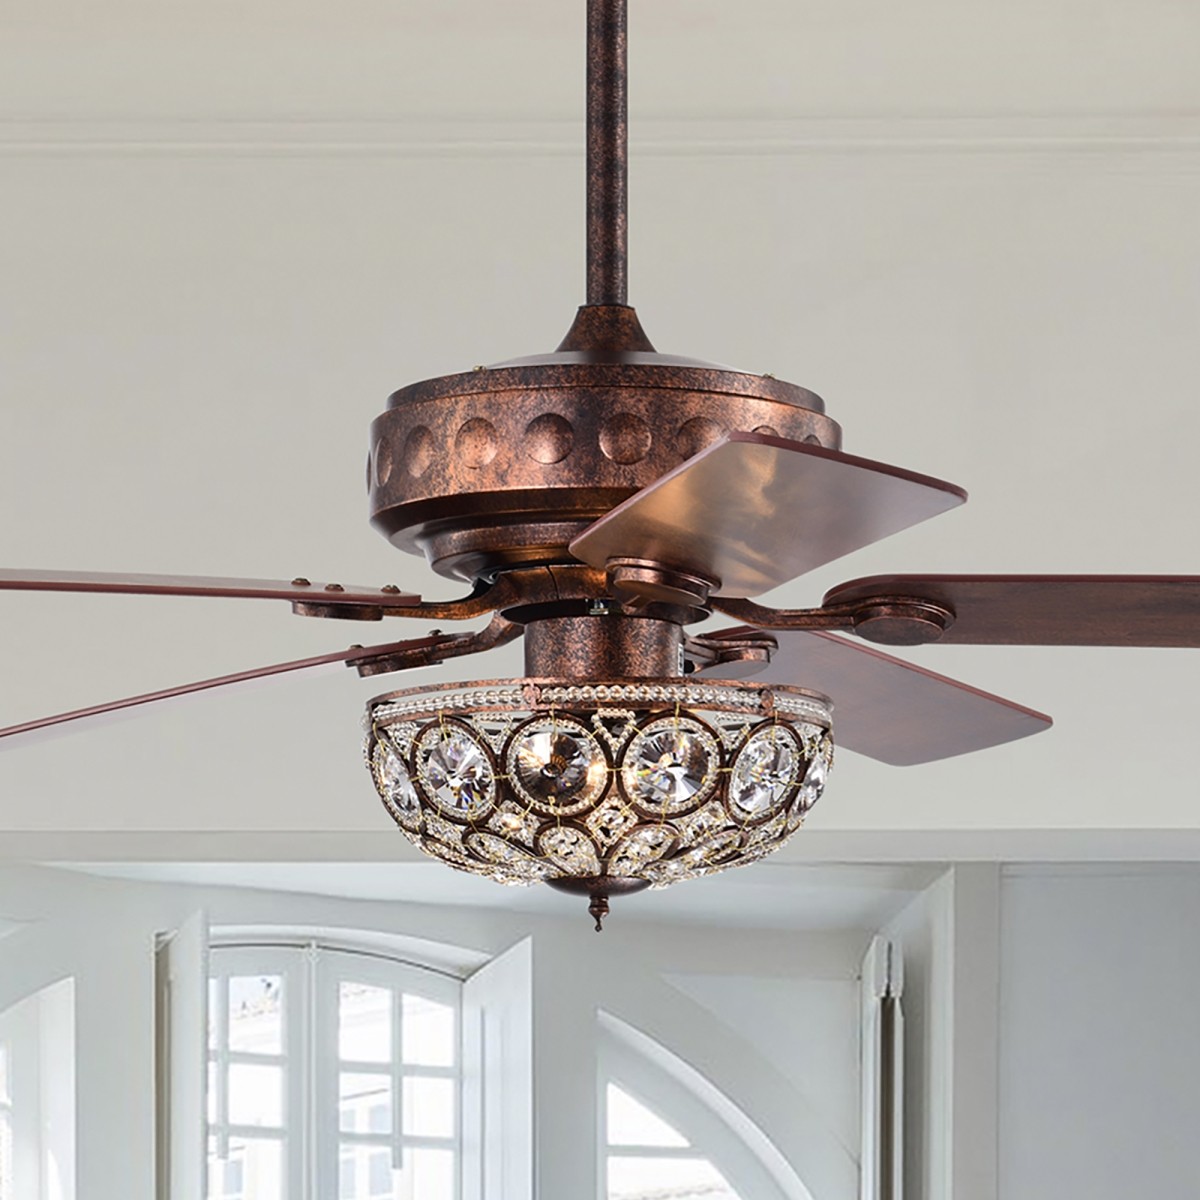 Jasiah 52 in. 3-Light Indoor Antique Copper Finish Ceiling Fan with Light Kit